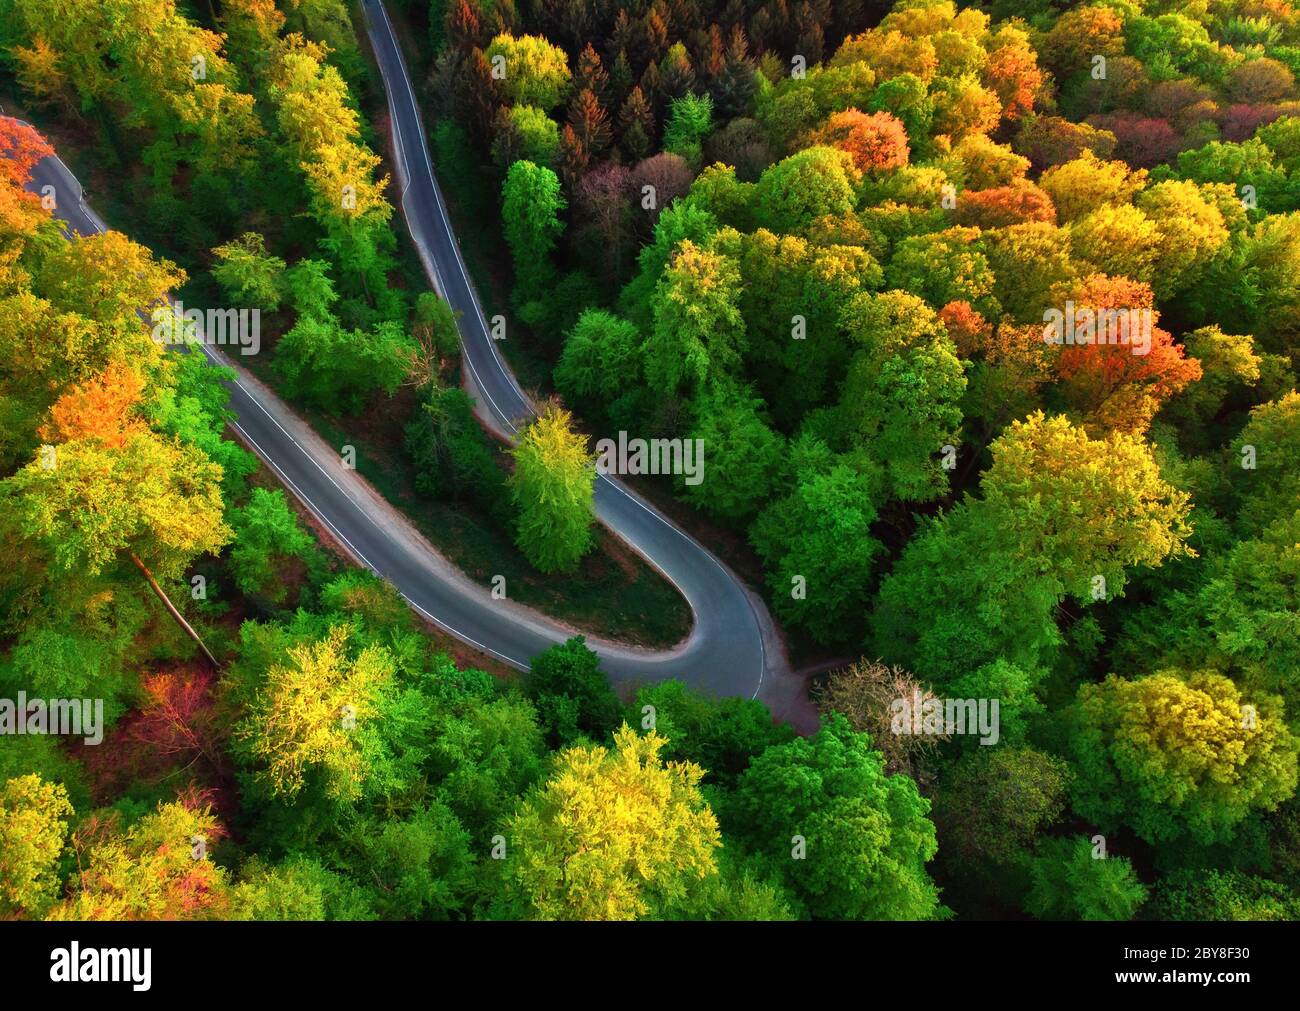 Colorful aerial landscape downward shot with the view of a road bend in a beautiful forest with deciduous trees Stock Photo